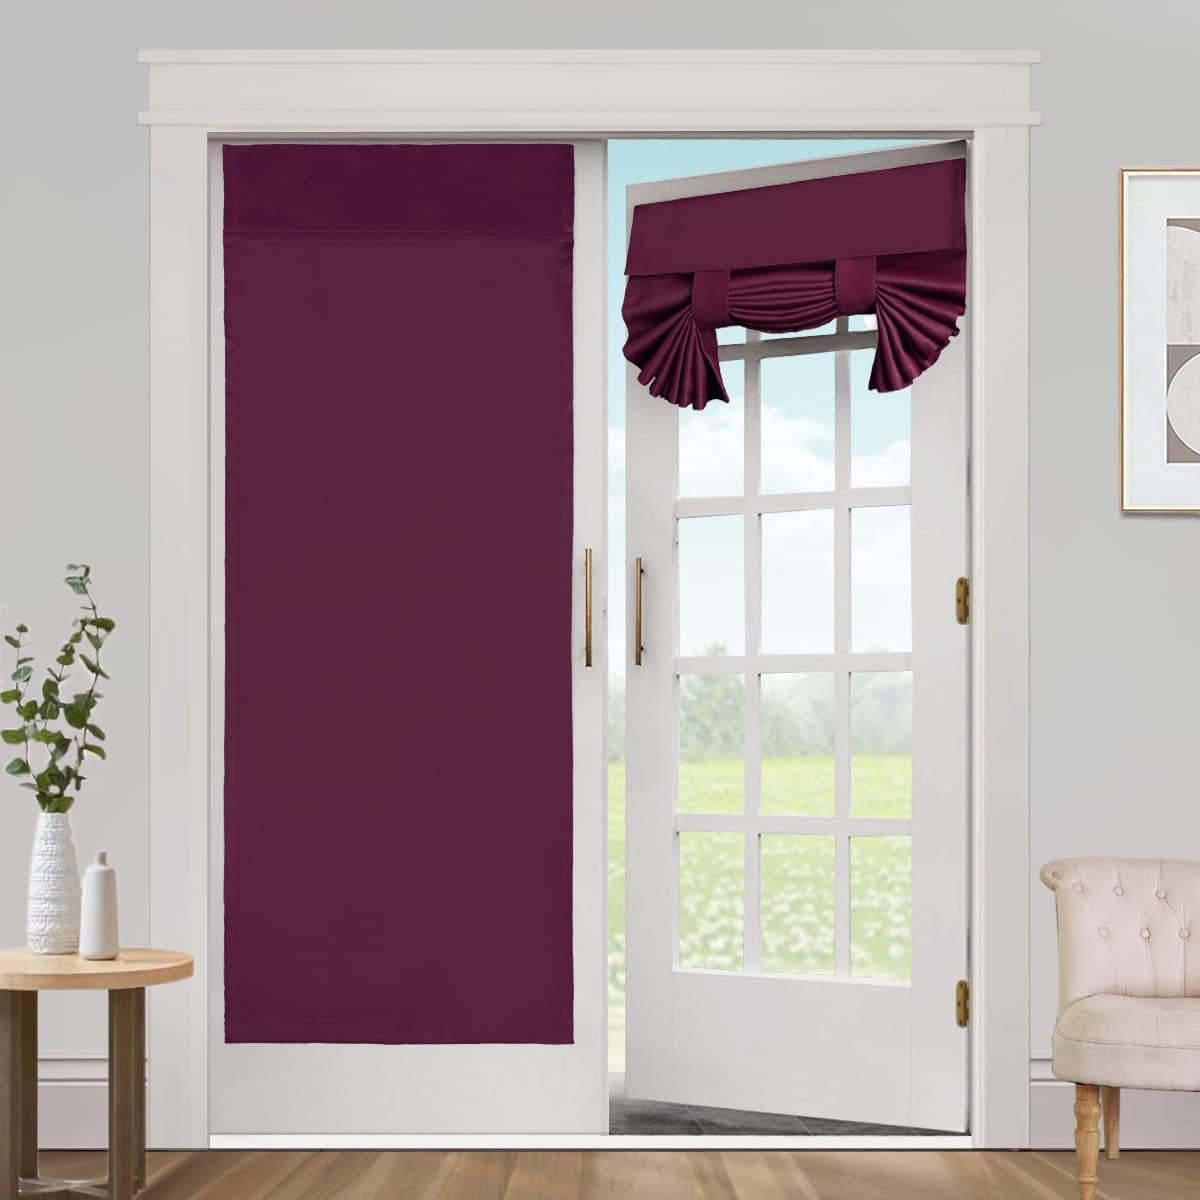 Blackout Curtains for French Doors - Thermal Insulated Tricia Door Window Curtain for Patio Door, Self Stick Tie up Shade Energy Efficient Double Door Blind, 26 X 68 Inches, 1 Panel, Sage  L.VICTEX Burgundy 2 